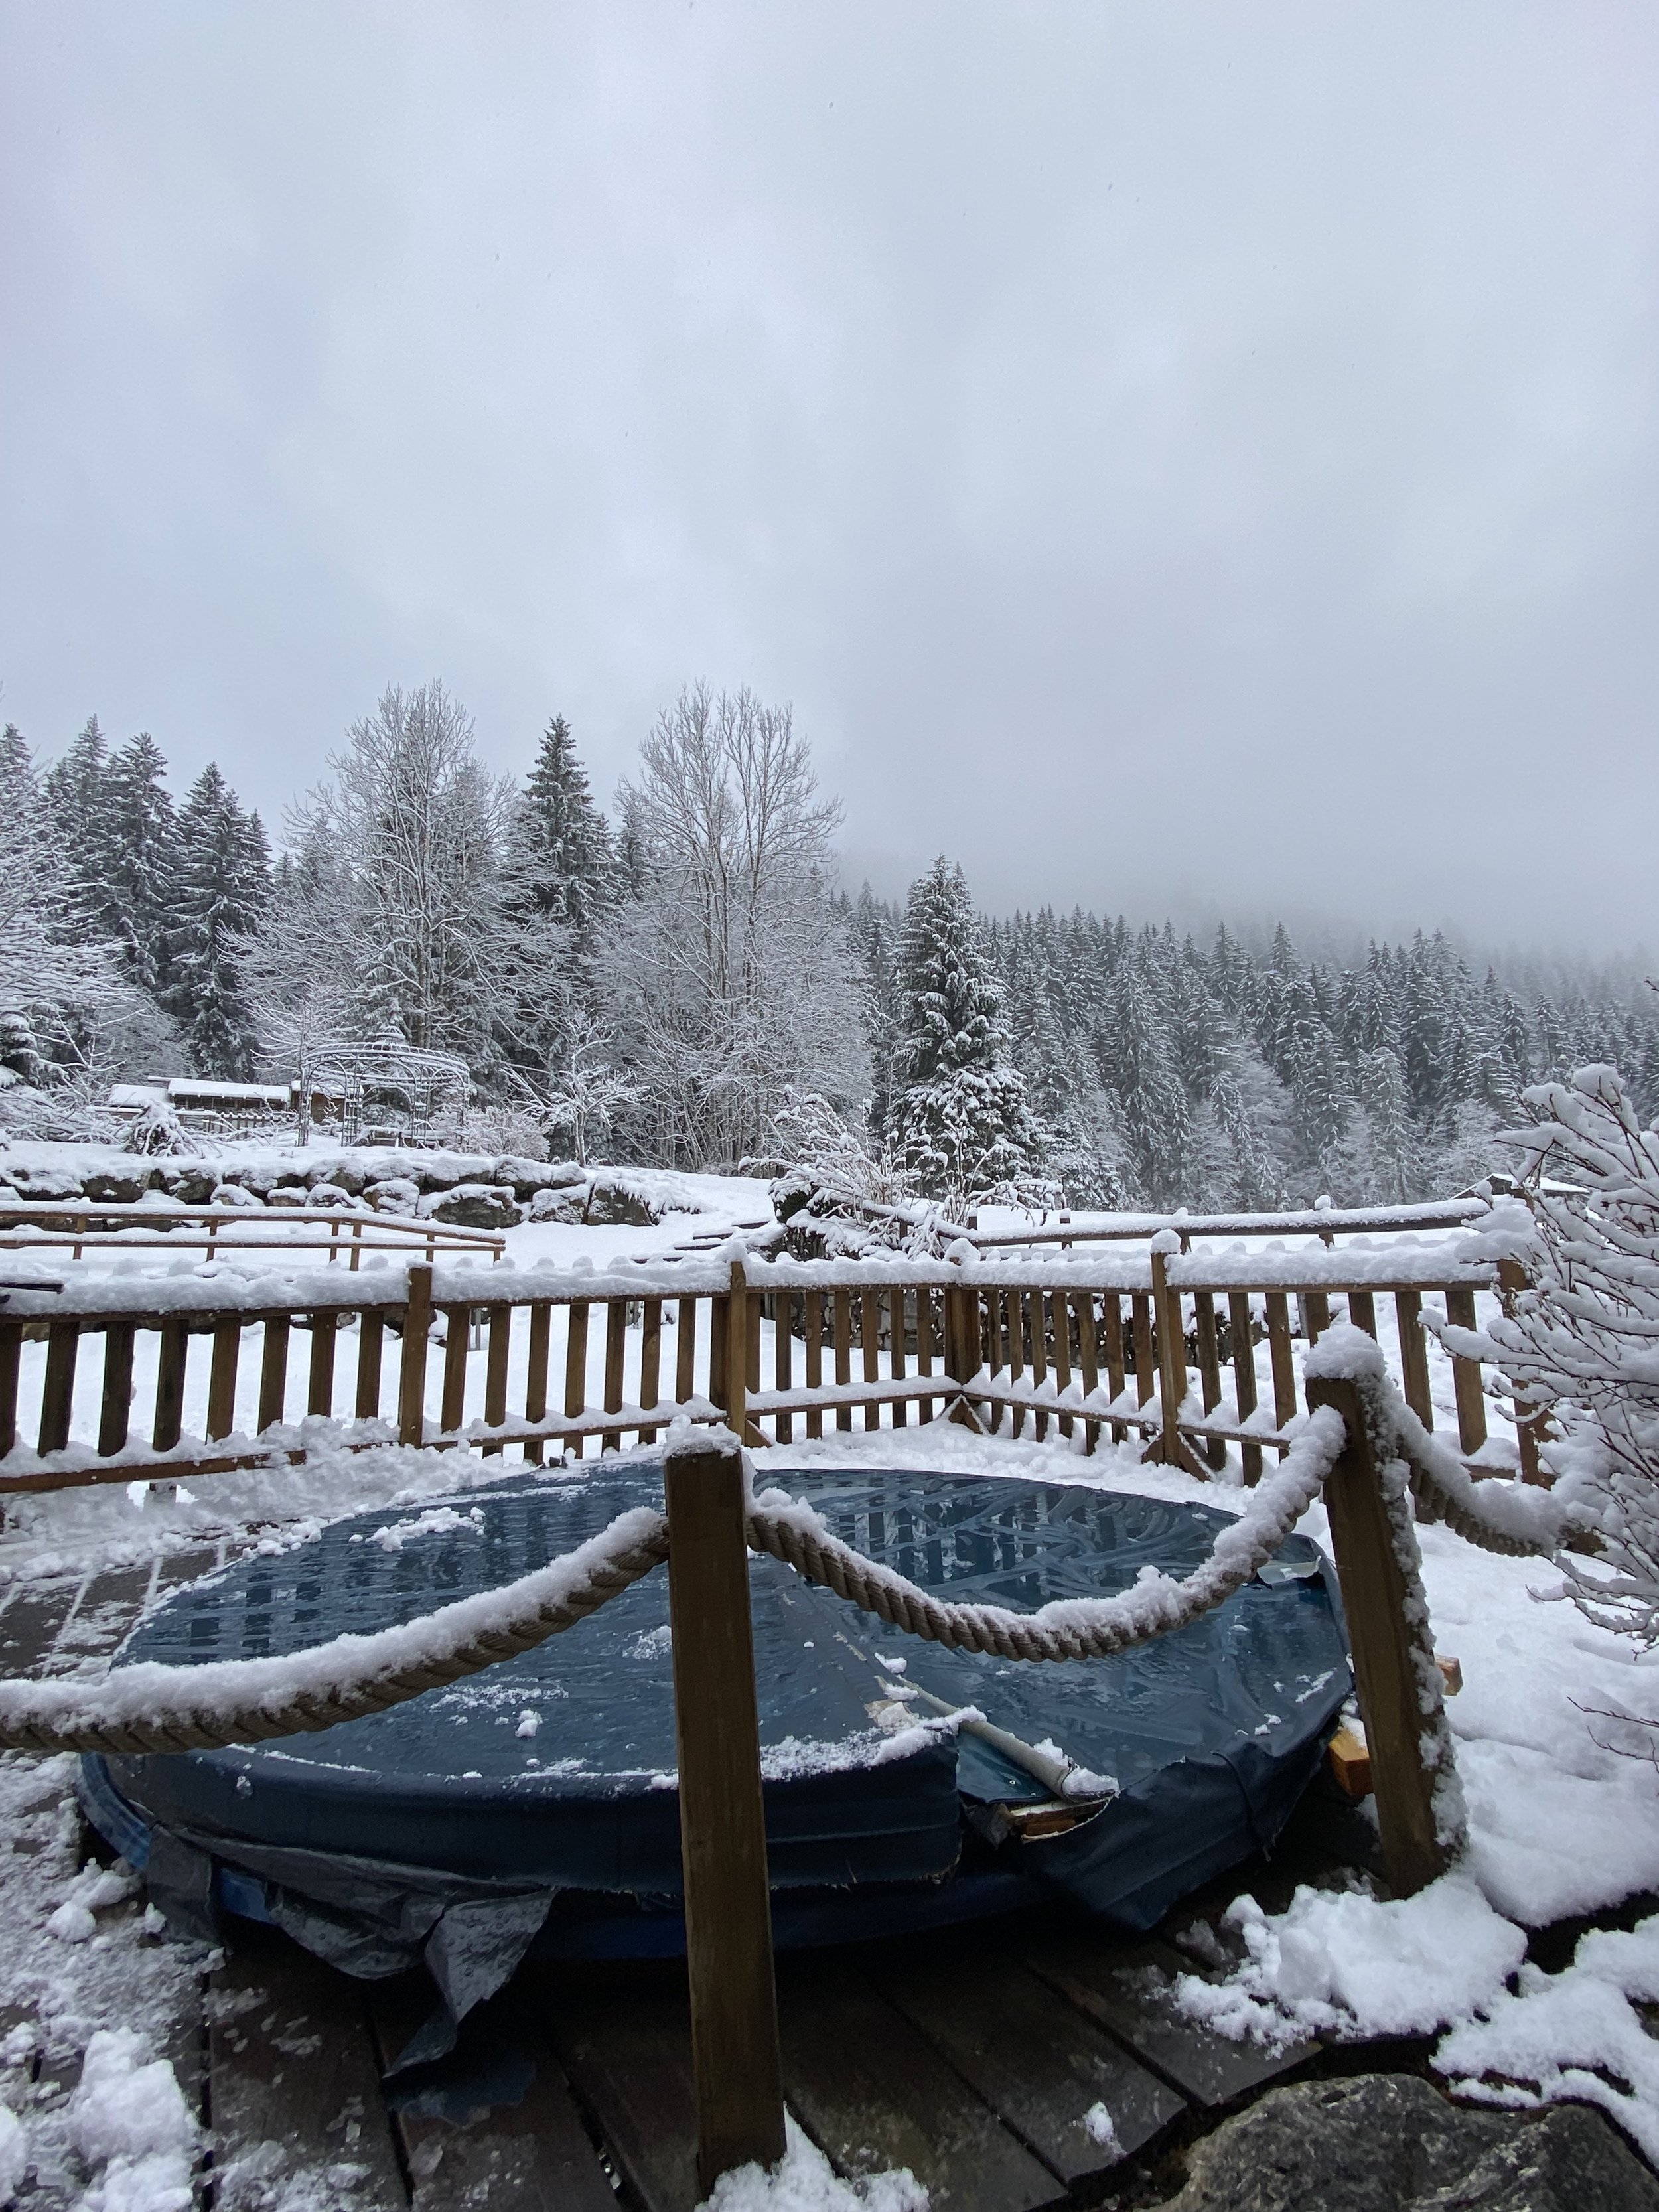 The jacuzzi in the snow outside the dining room of Chilly Powder